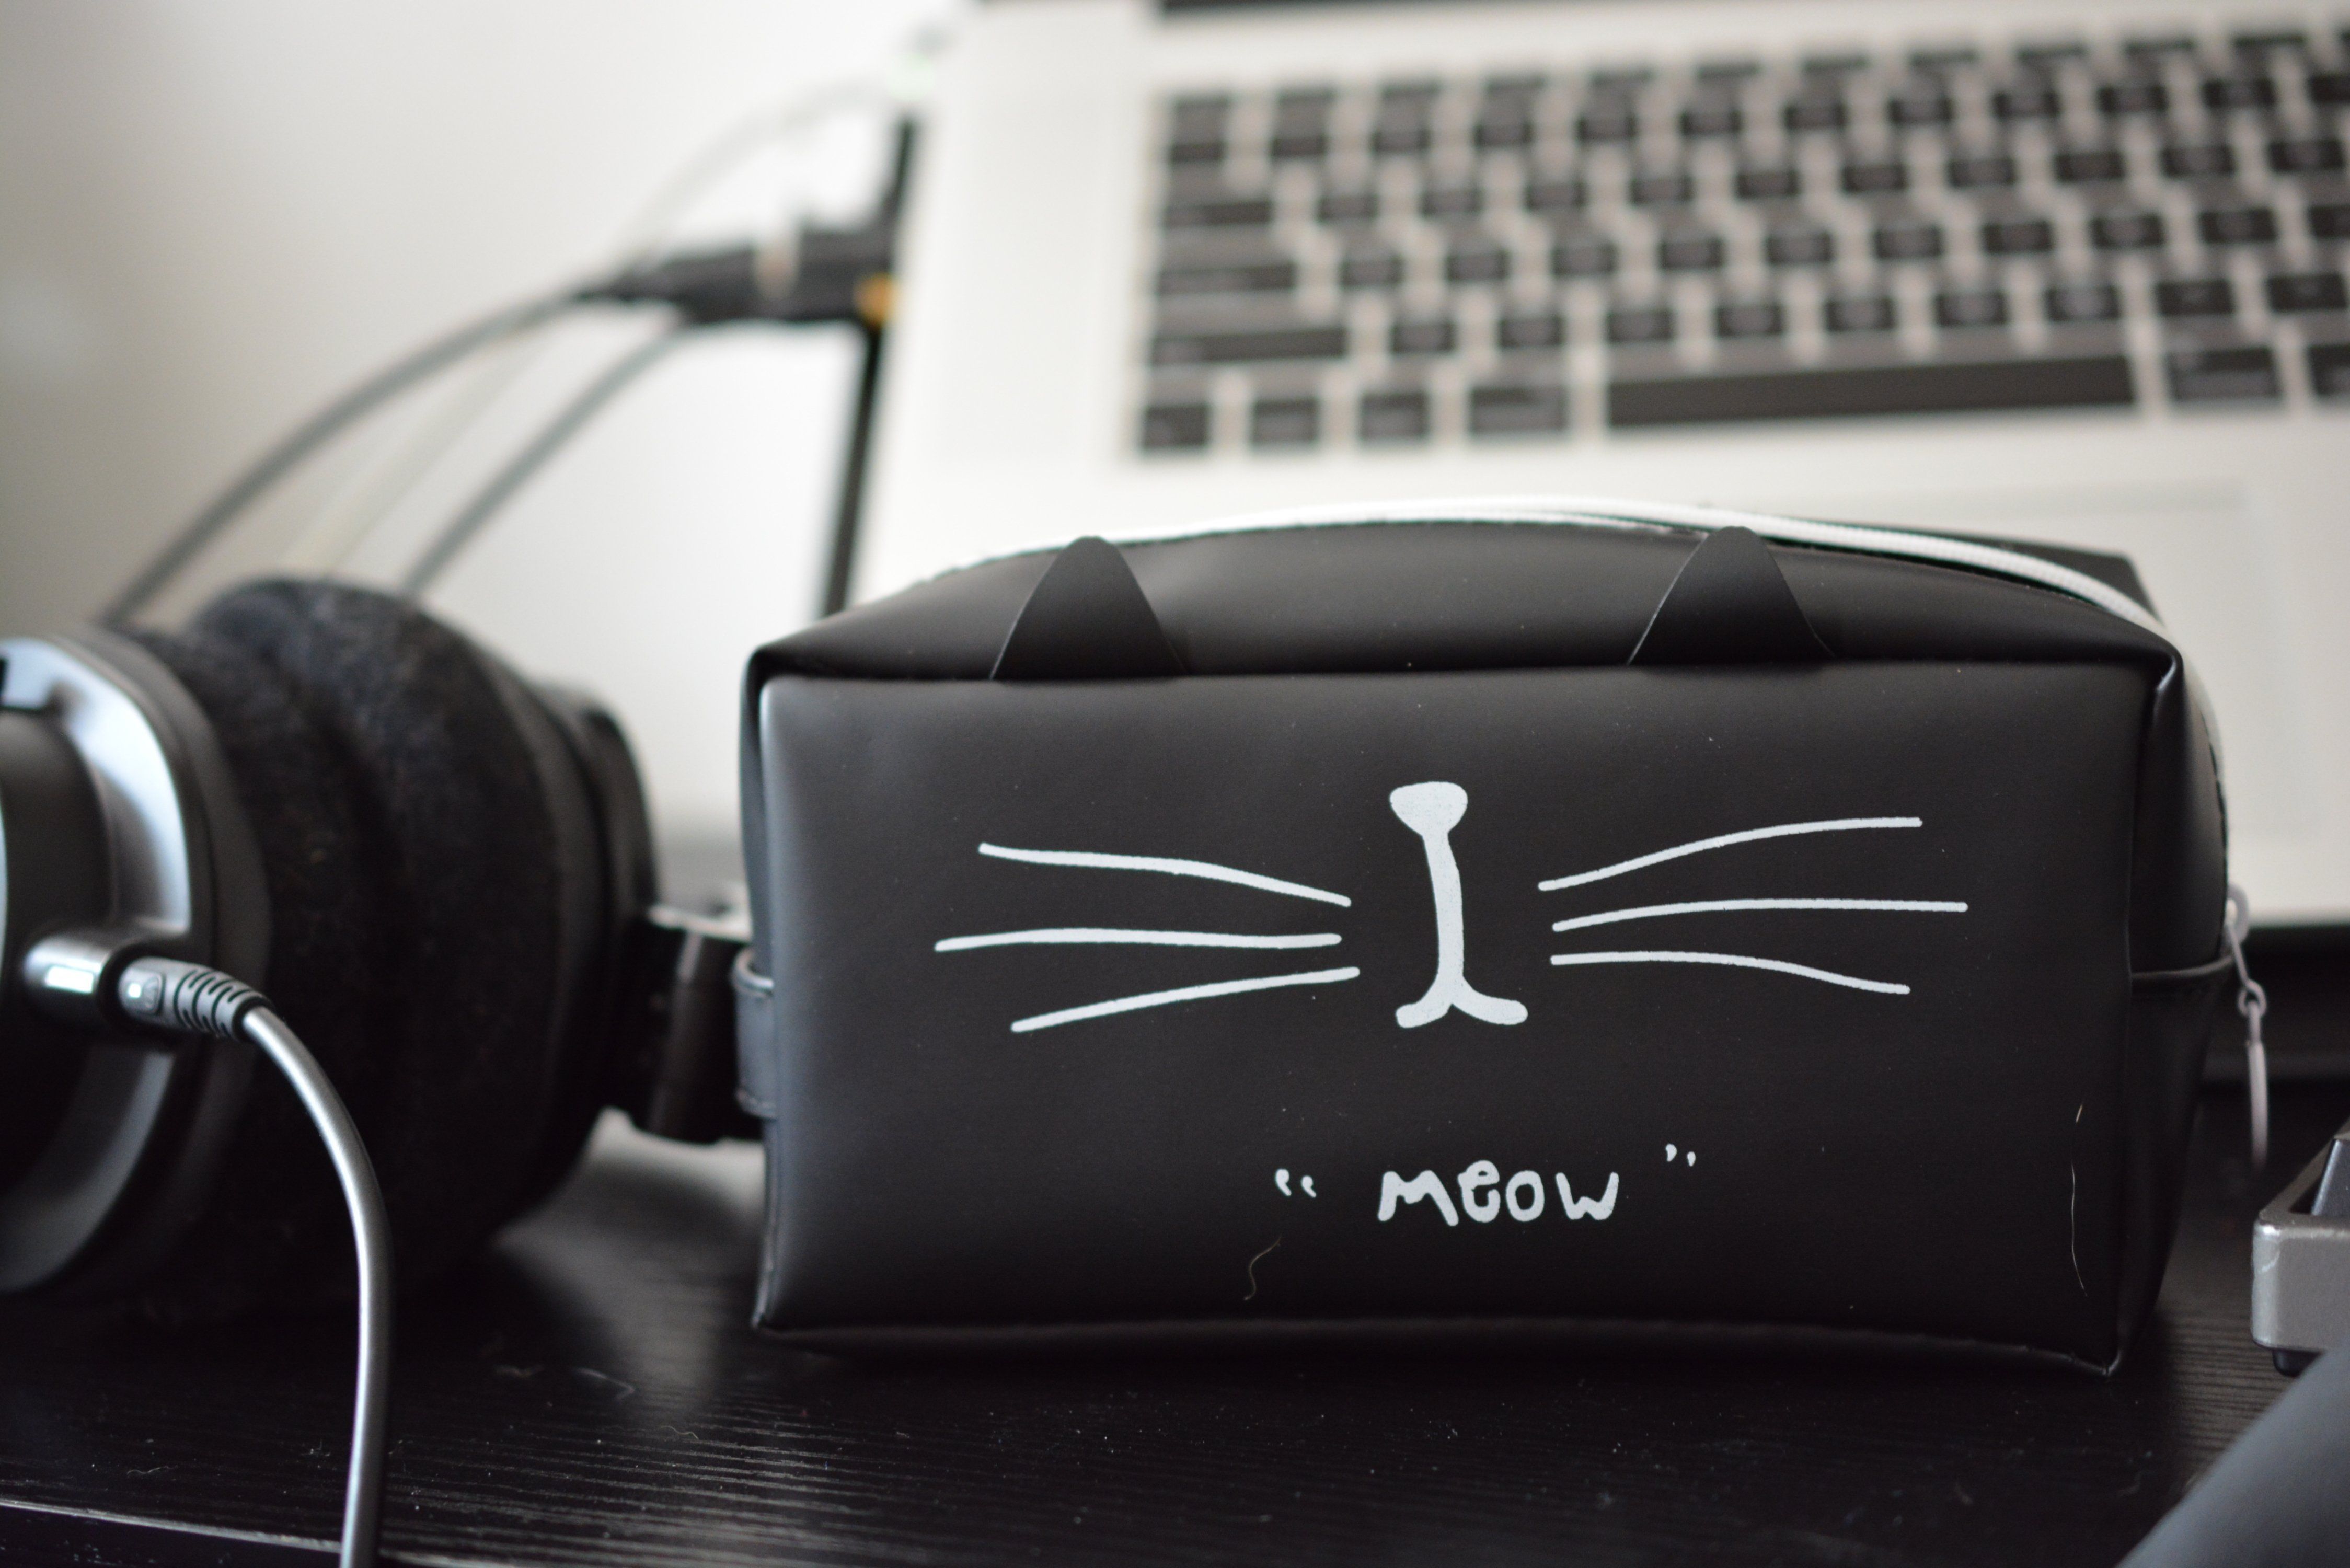 Cute Cat Pencil Case on Desk with laptop and headphones